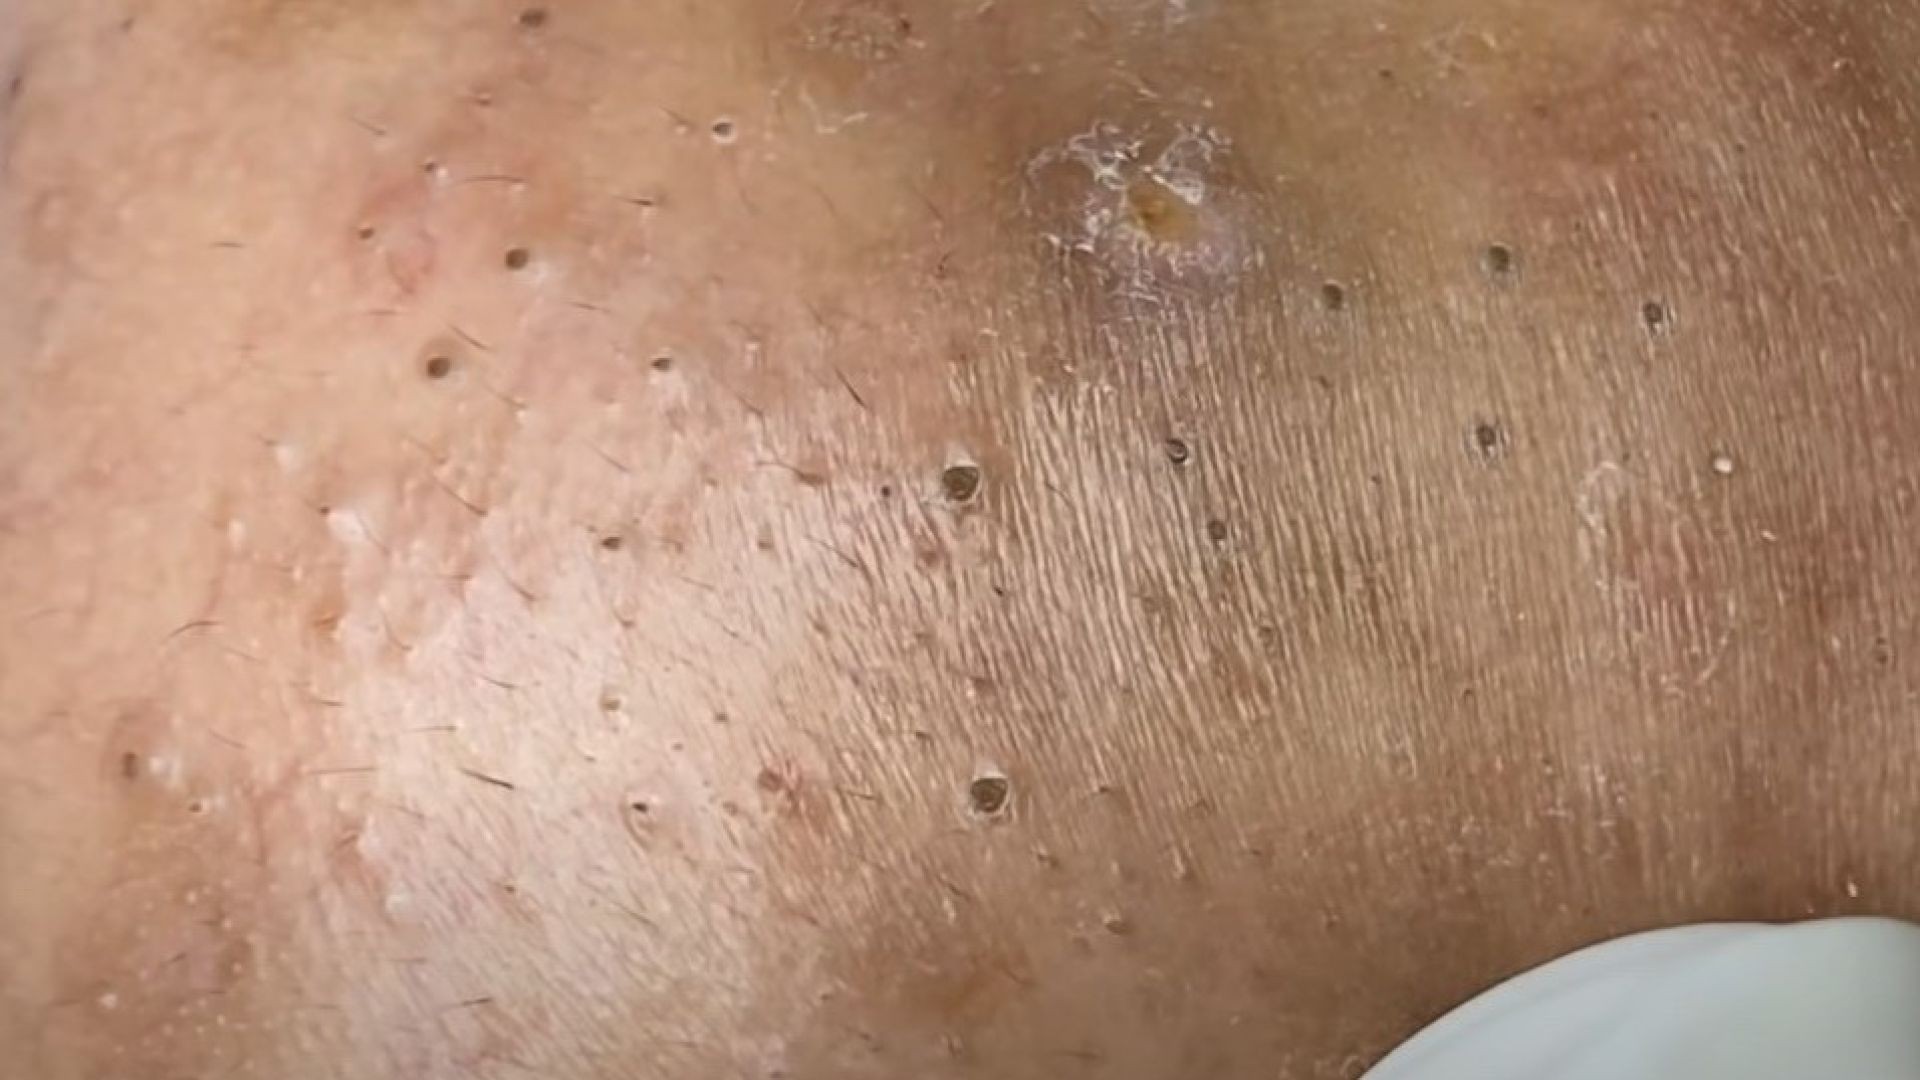 New pimple popping of the last stage of severe acne